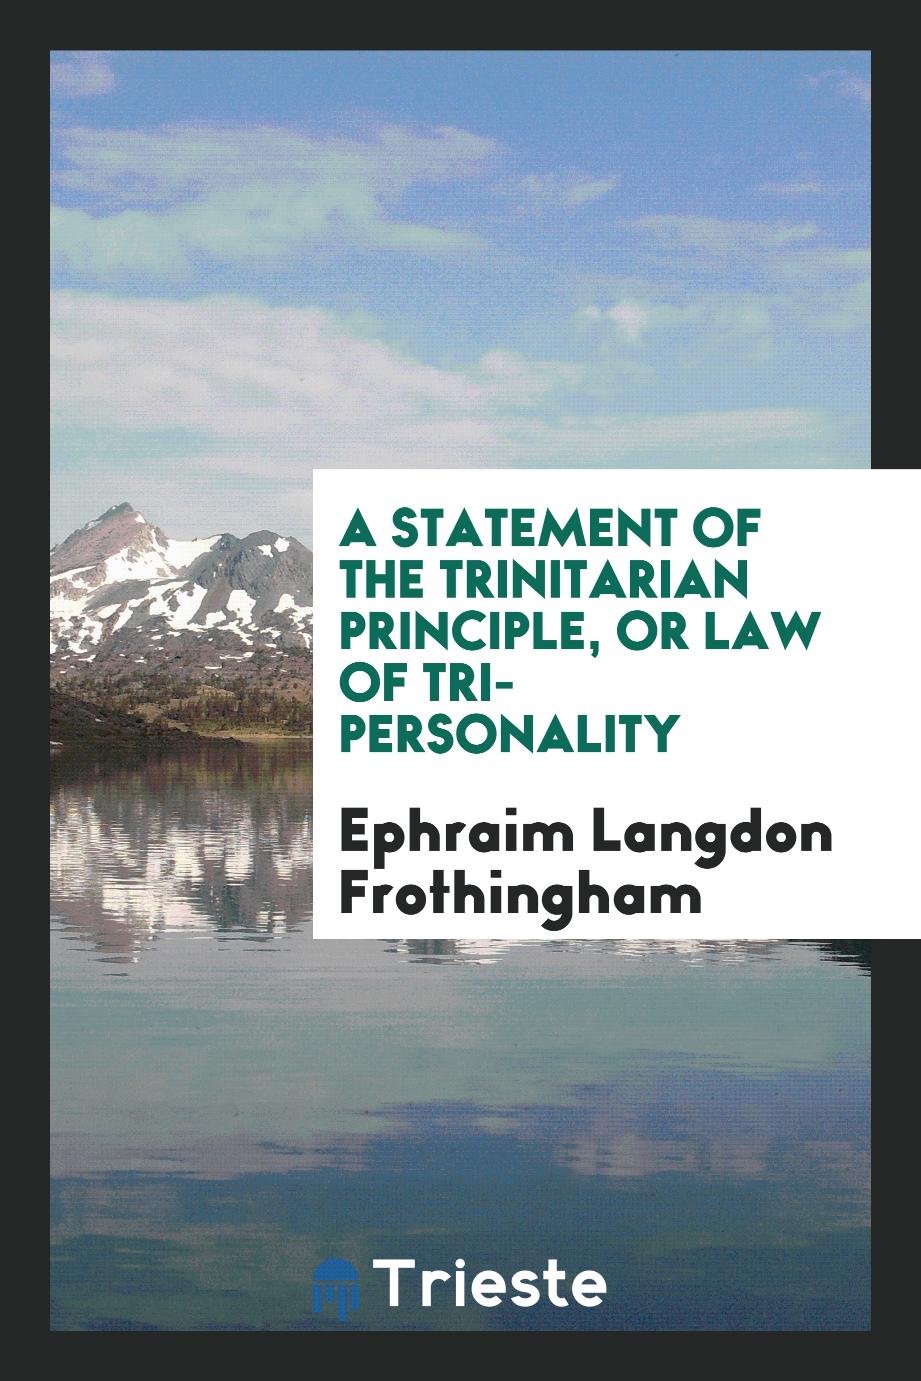 A Statement of the Trinitarian Principle, or Law of Tri-Personality